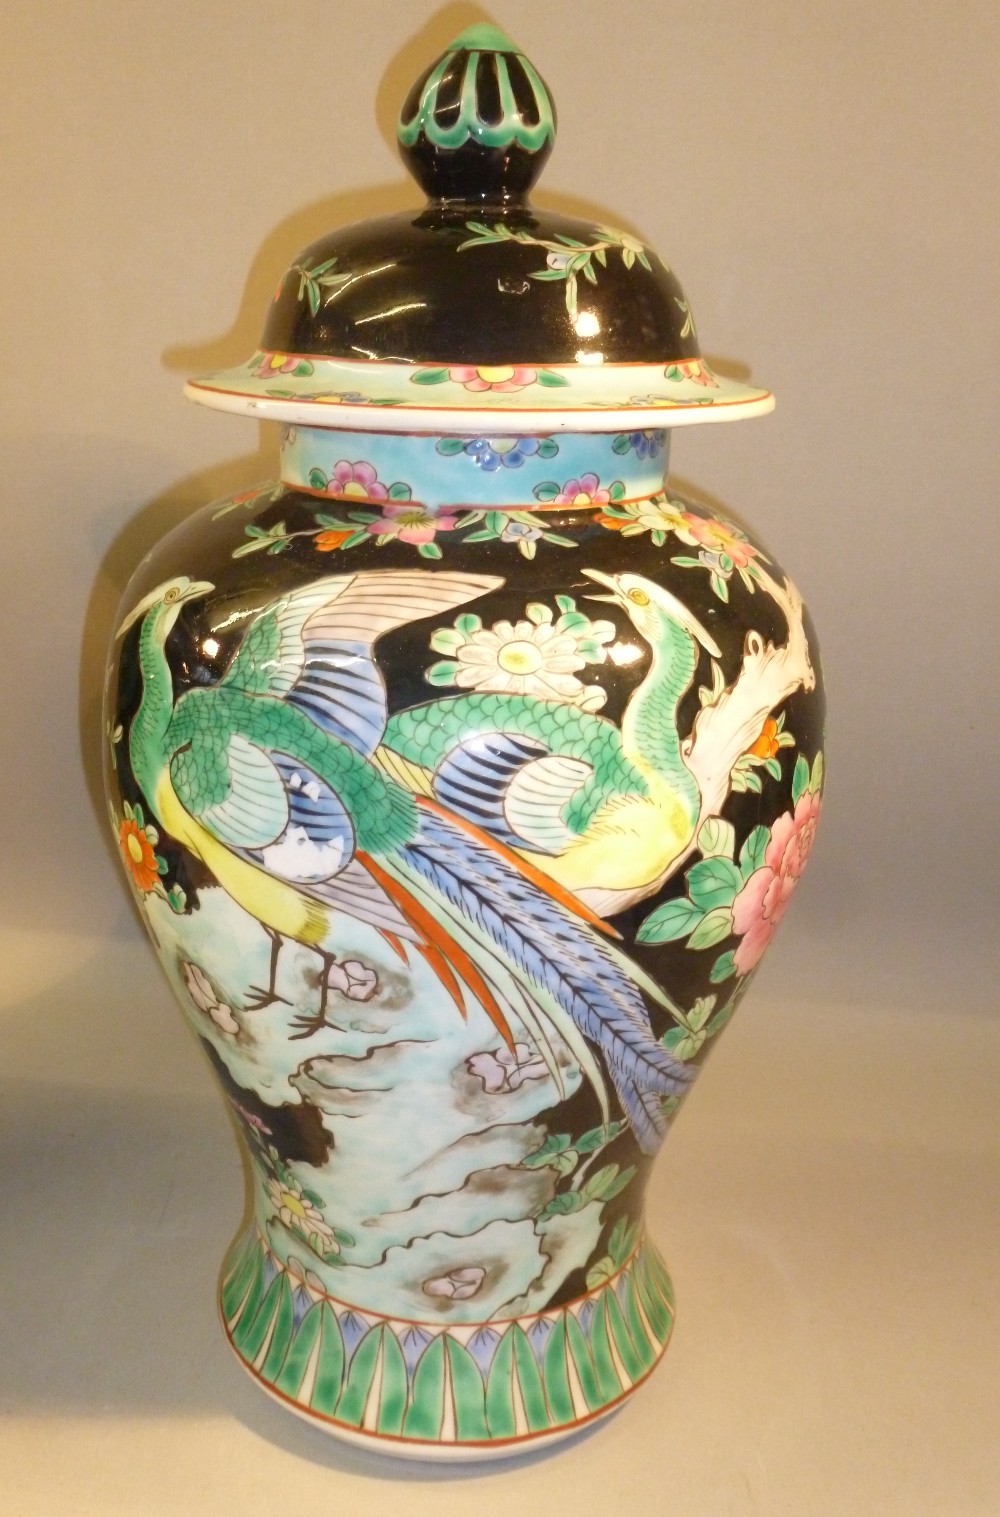 EARLY C20th PAIR OF JAPANESE IMARI COVERED VASES (H: 36.5 cm, DIA: APPROX. 19 cm) - Image 5 of 5